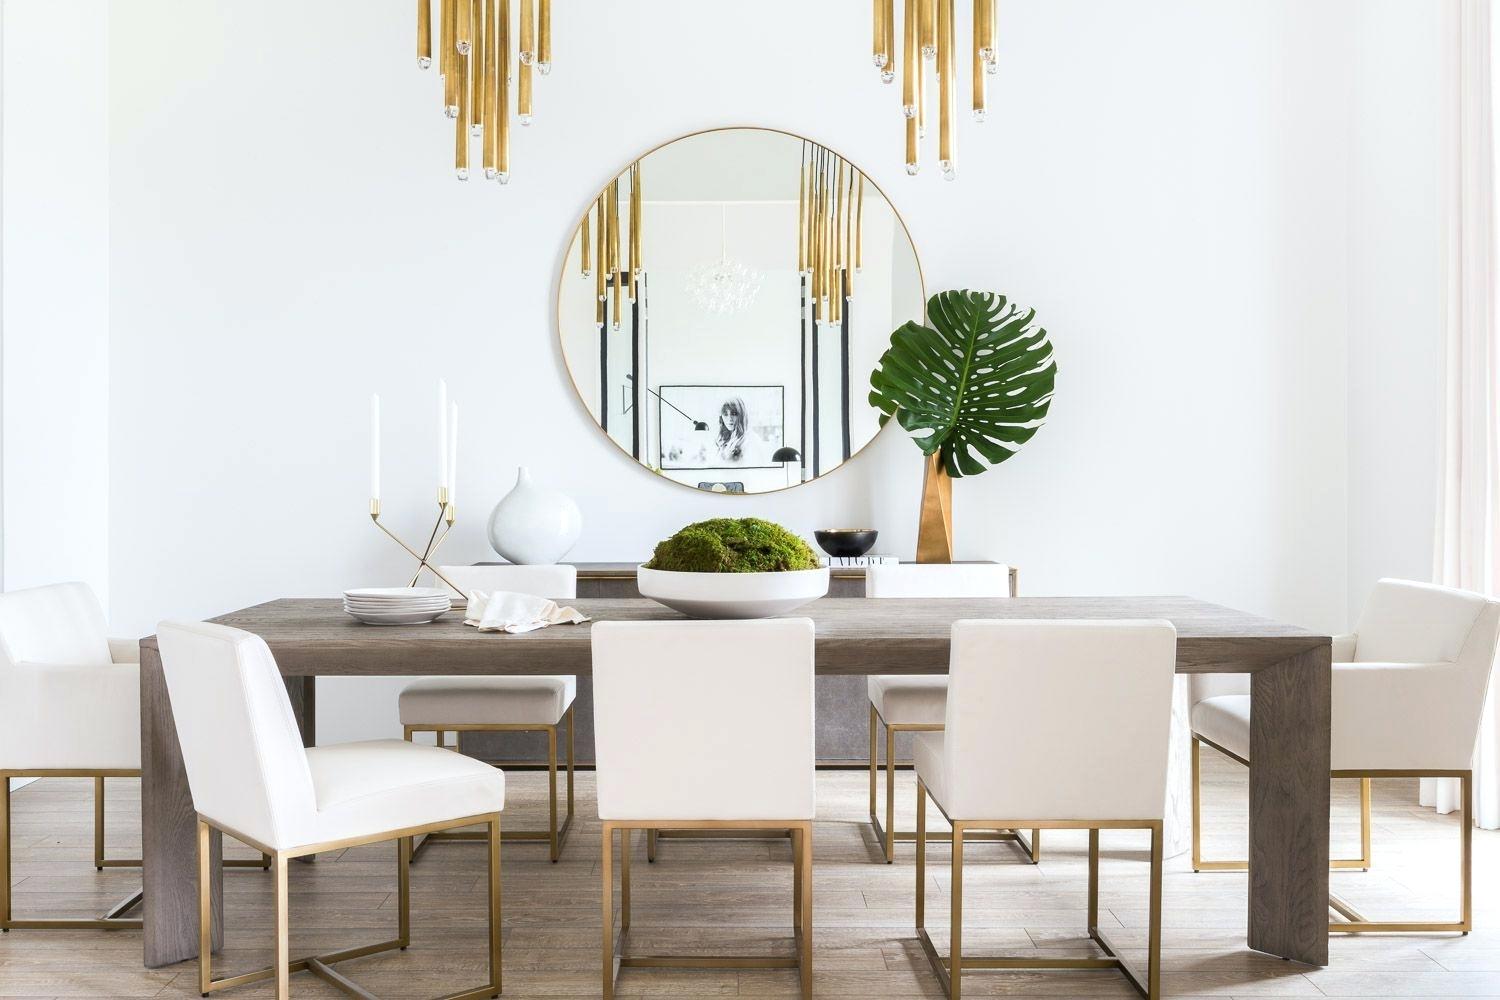 Decorating with Mirrors! - Soho Interior Design Projects